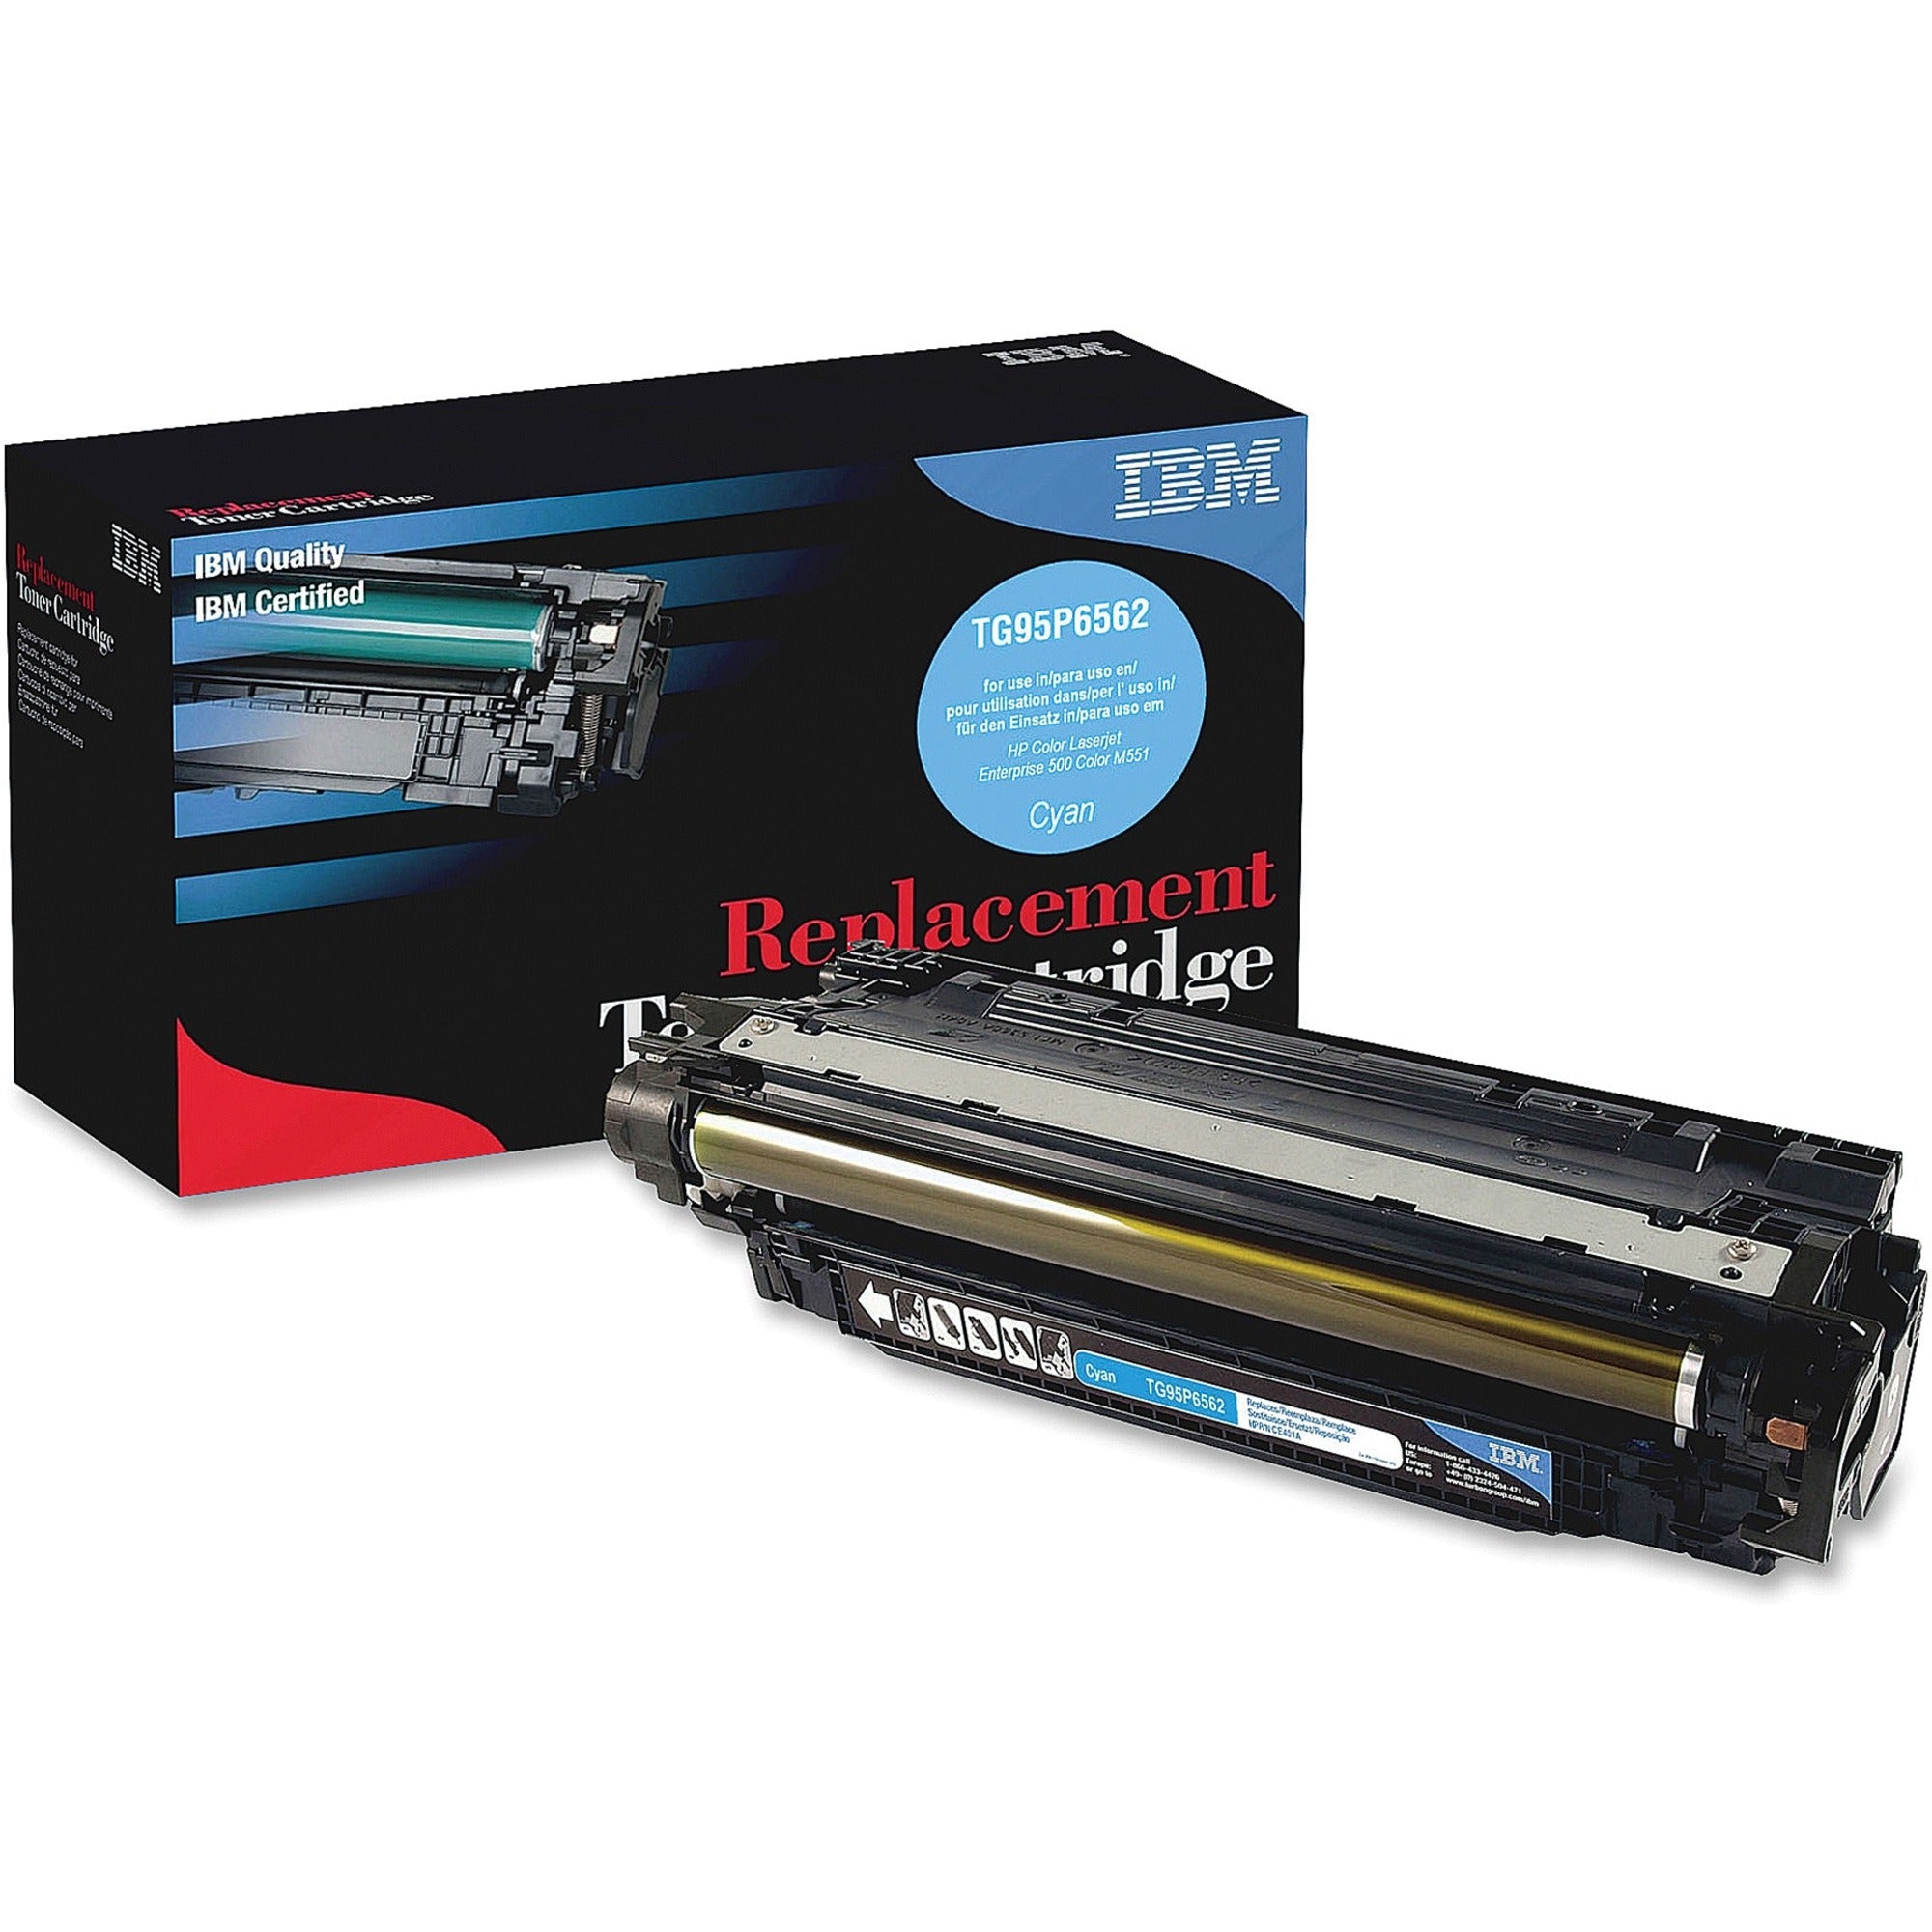 IBM Remanufactured Laser Toner Cartridge - Alternative for HP 507A (CE401A) - Cyan - 1 Each - 6000 Pages - 